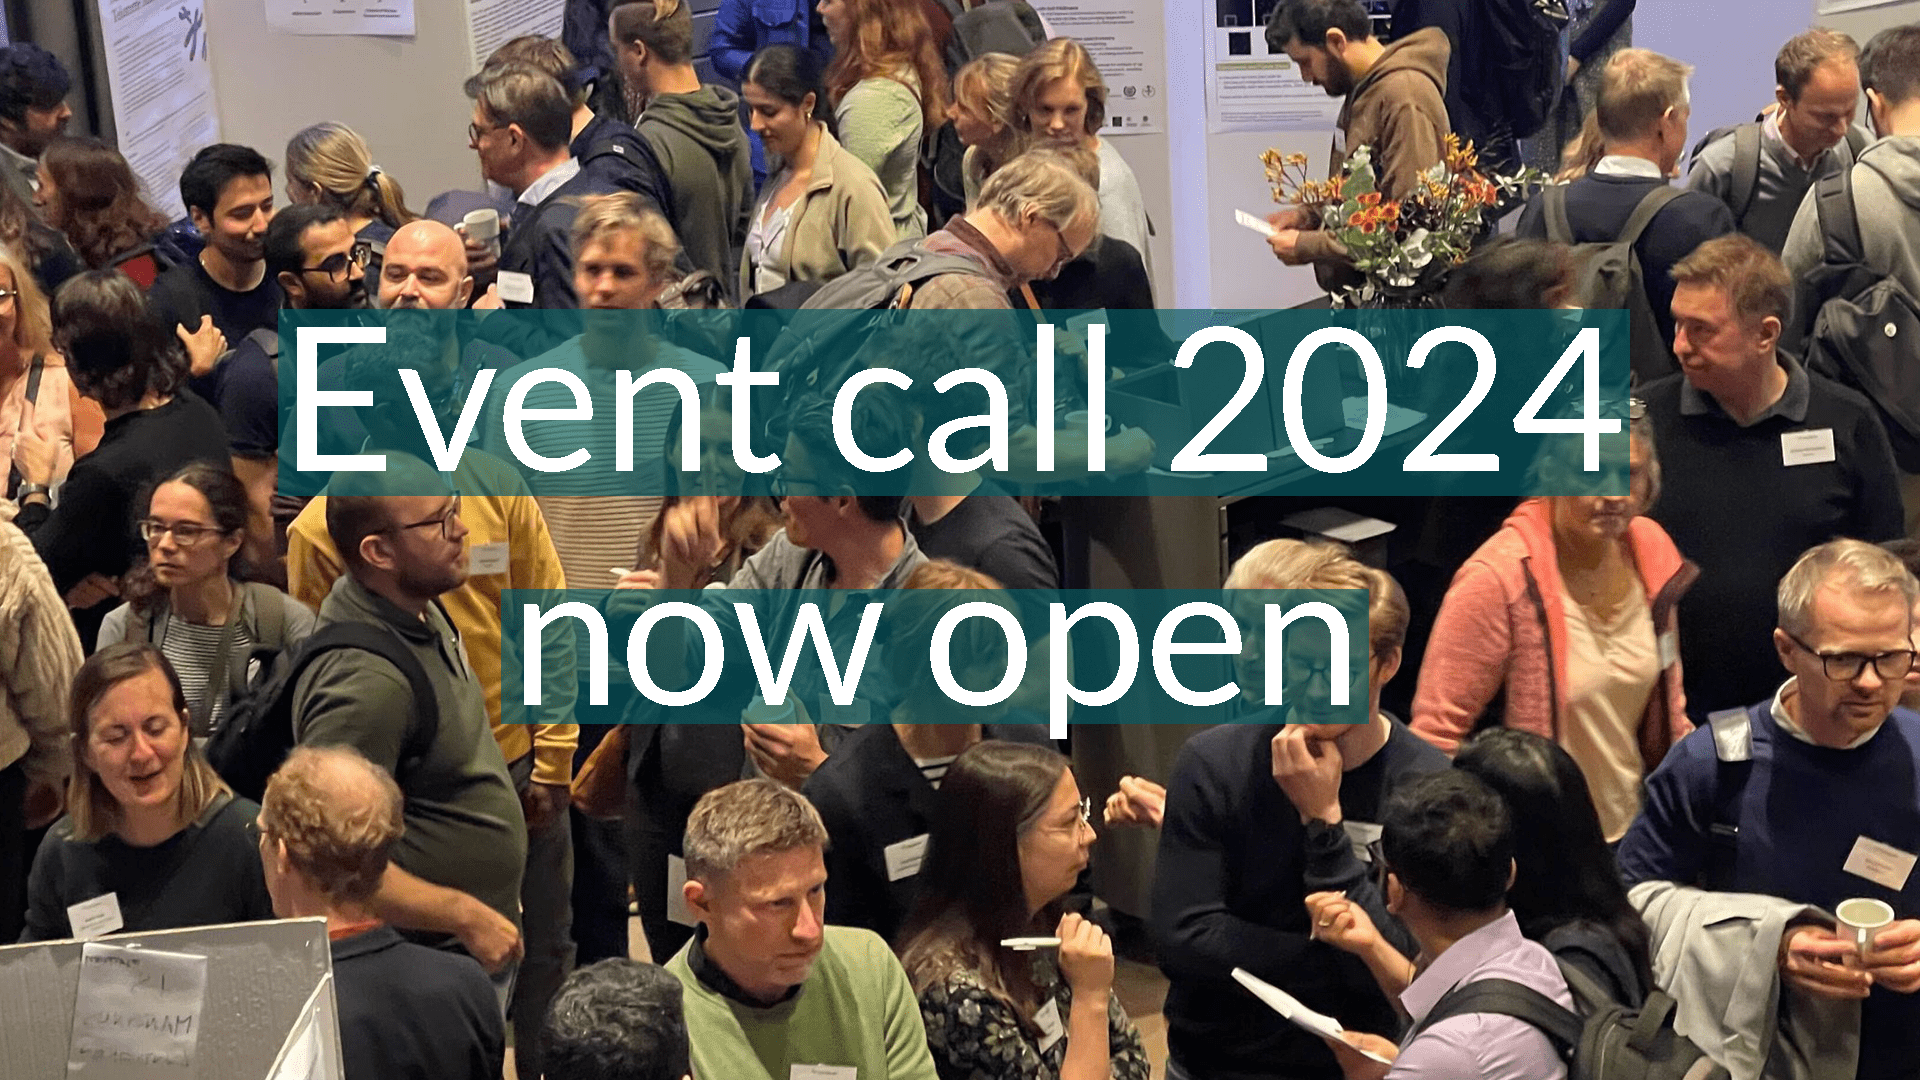 Event call 2024 open